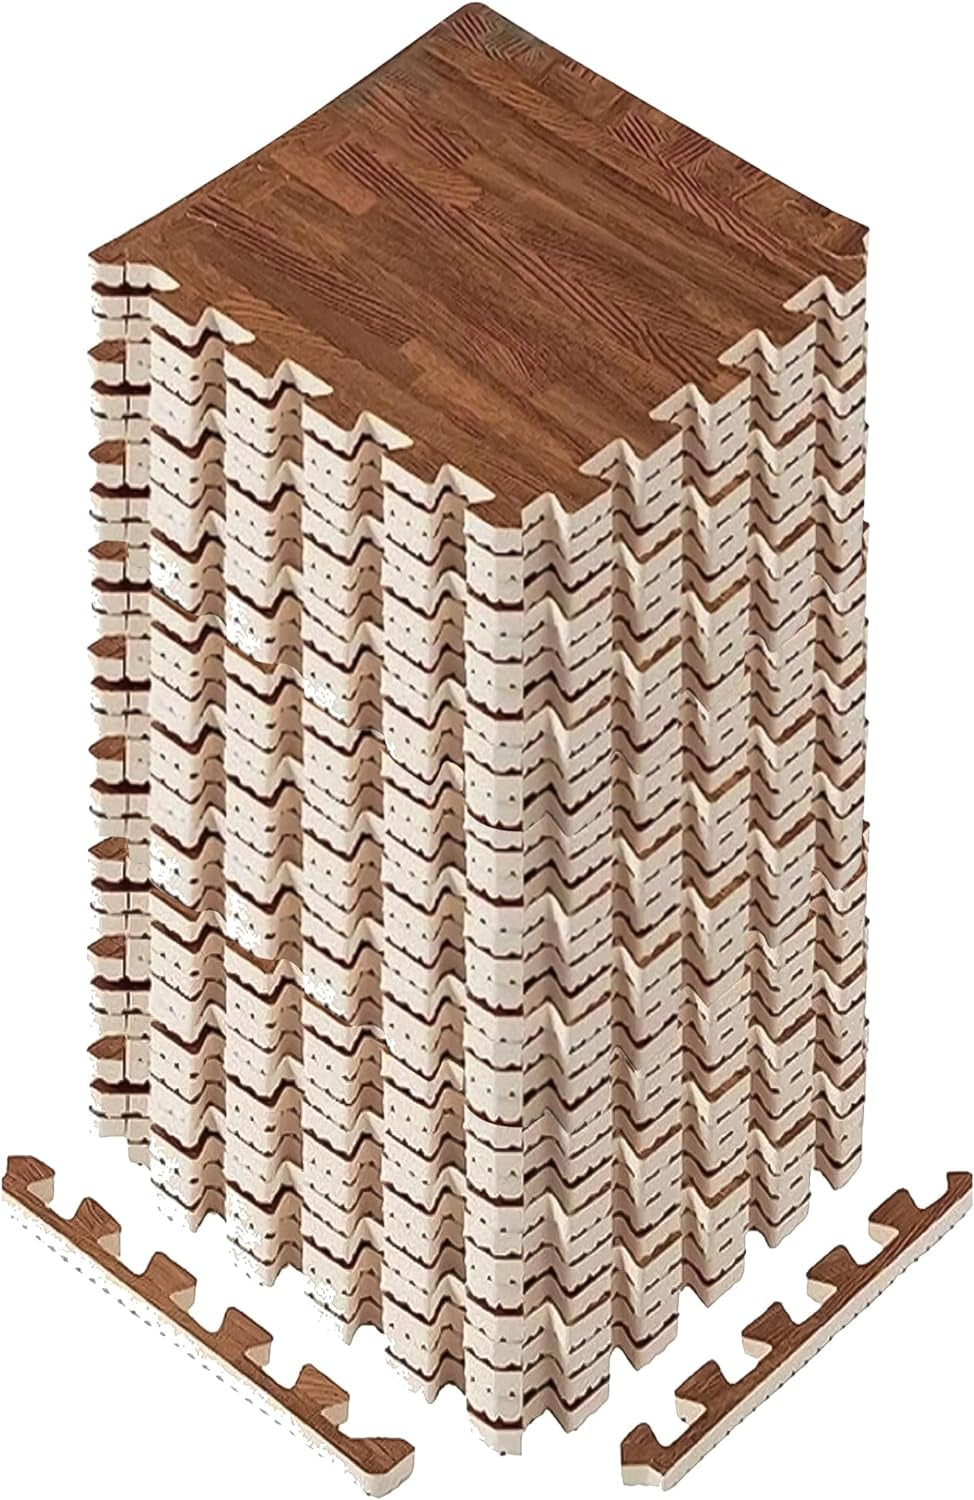 12,24,36 SQ.FT Wood Grain Puzzle Exercise Mat Protective Flooring, EVA Foam Floor Tiles with Border for Home